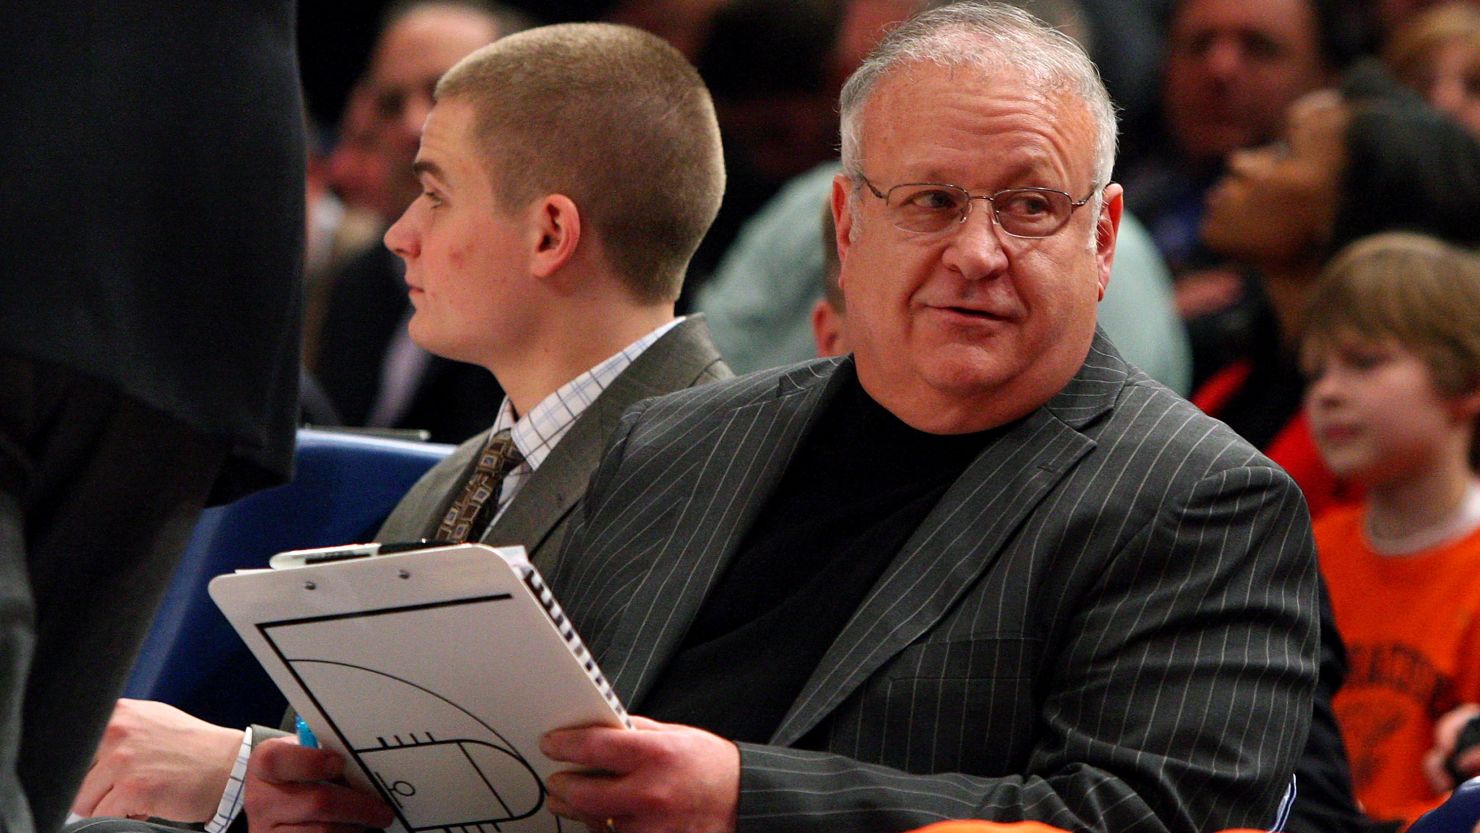 Syracuse assistant basketball coach Bernie Fine was fired after 35 years with the program.